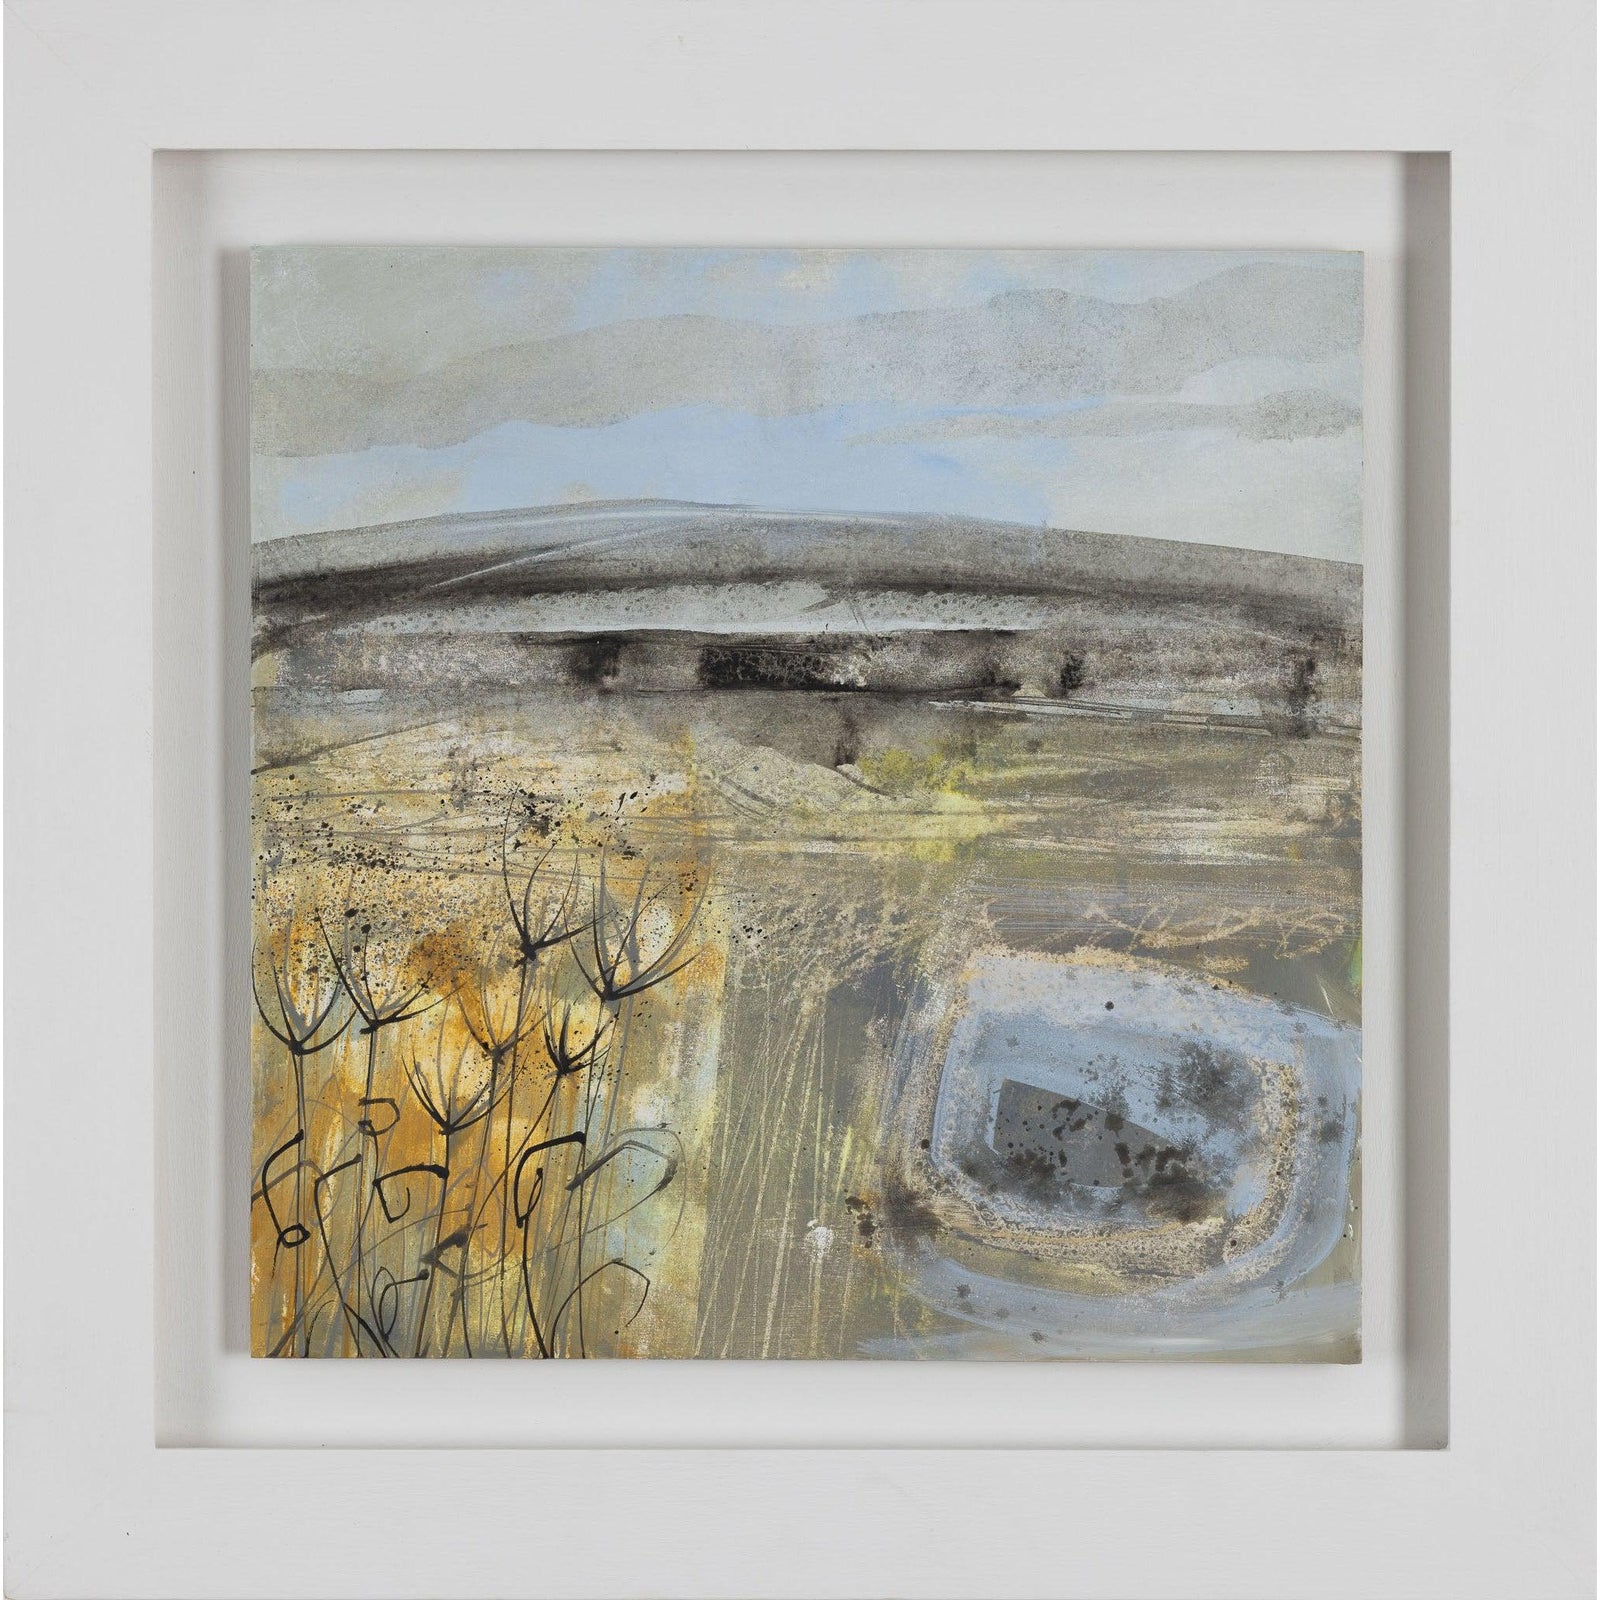 'Bridging the Seasons' oil on board by Ruth Taylor, available at Padstow Gallery, Cornwall